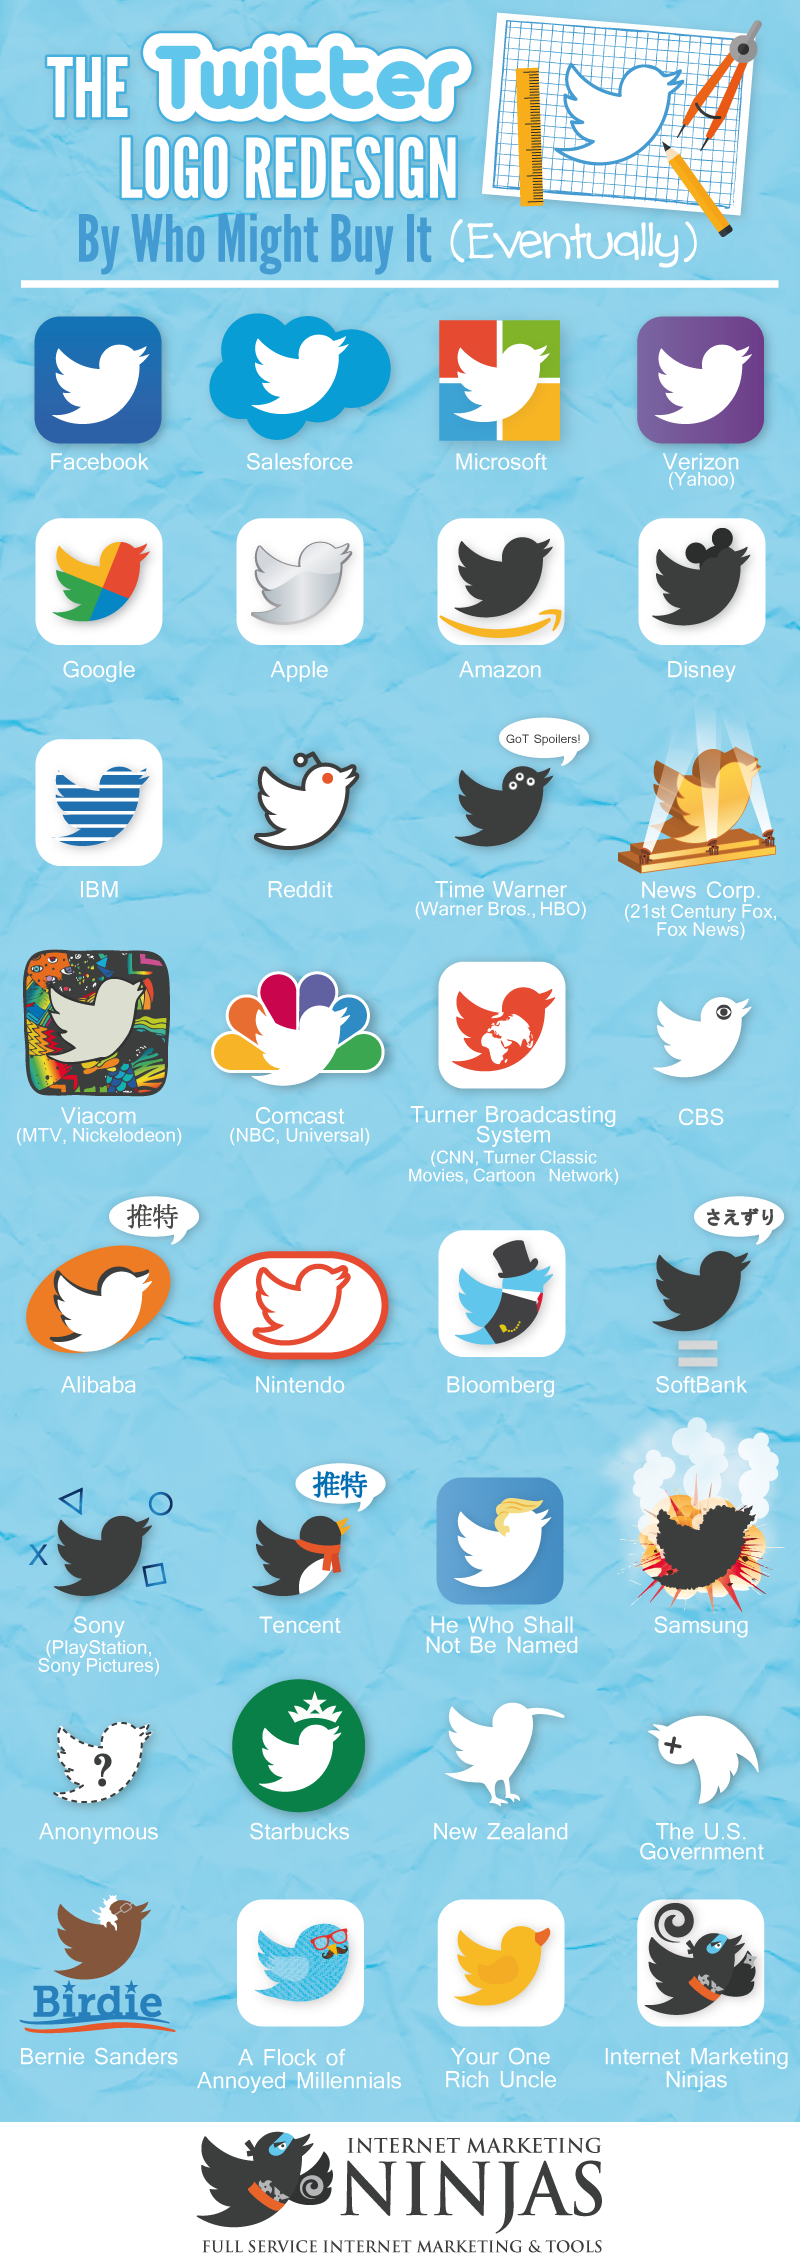 The Twitter Logo Redesign By Who Might Buy It (Eventually)